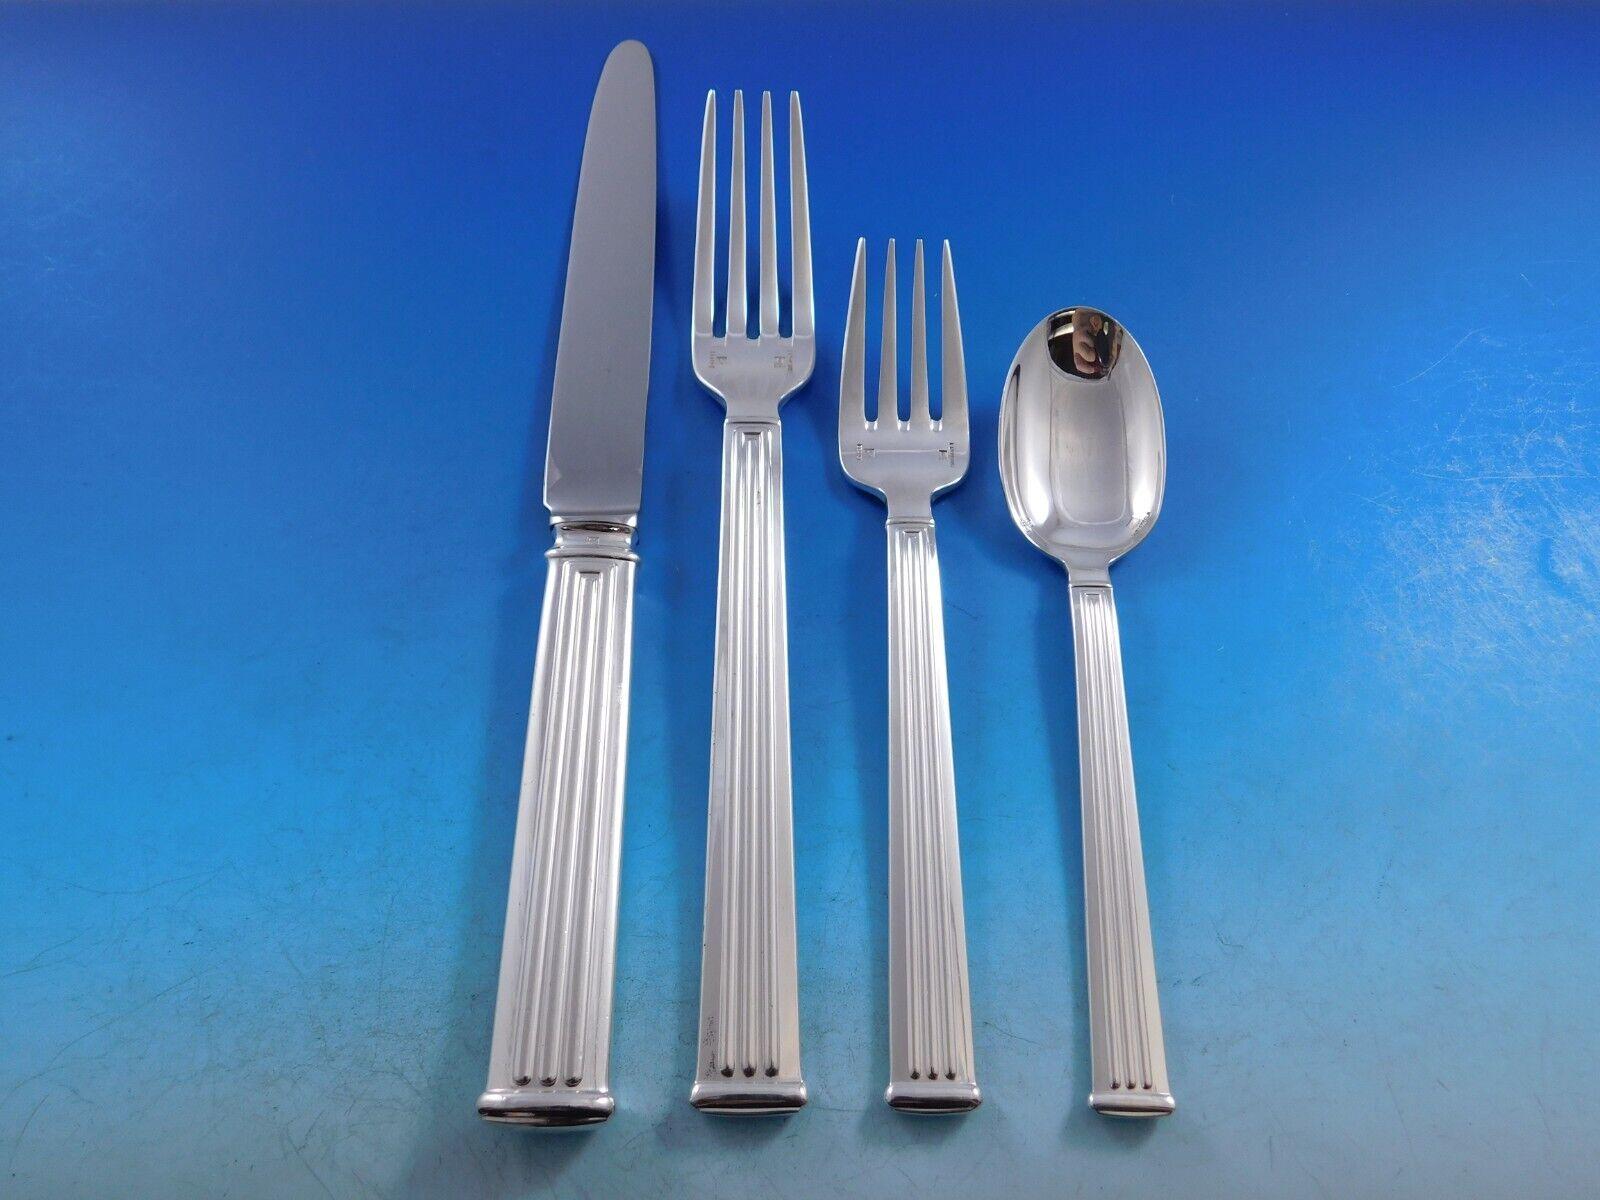 Modern clean lines in a Classic column motif makes this pattern, Triade, forever timeless. 
Dinner Size Triade by Christofle France Silverplated Flatware set - 66 pieces. This set includes:

8 Dinner Knives, 9 3/4